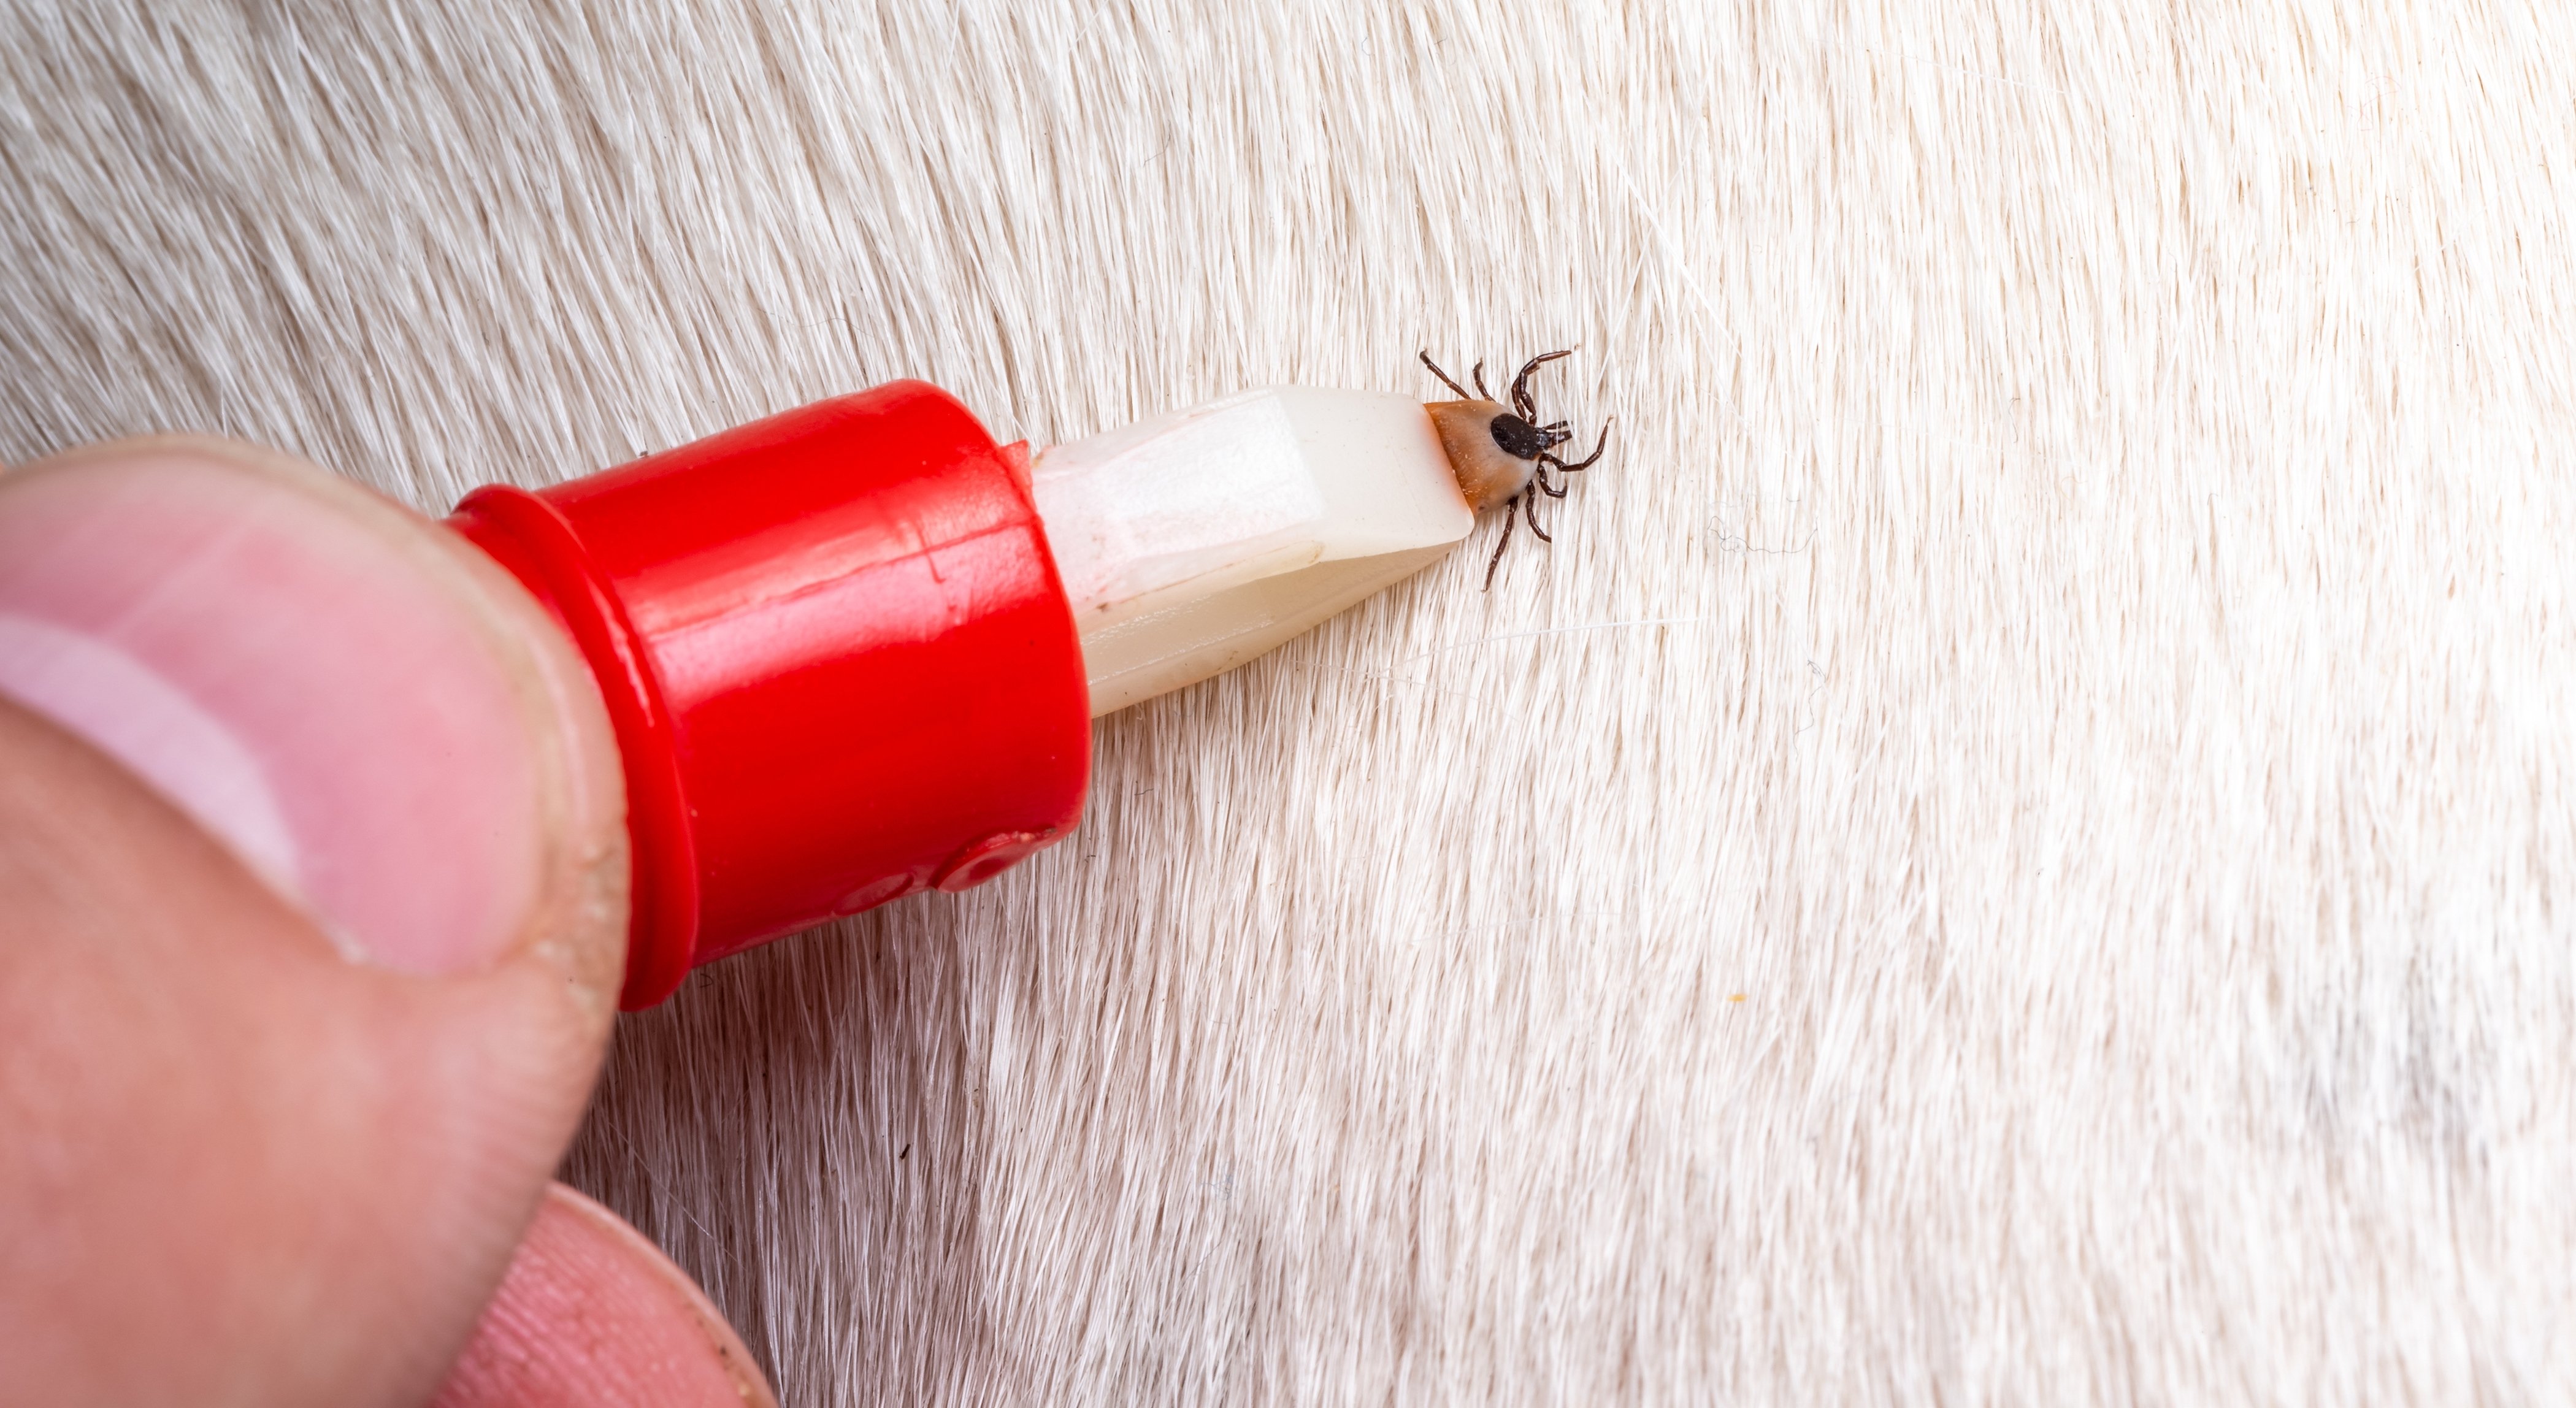 How to Check for Ticks on Dogs, Cats and Kids